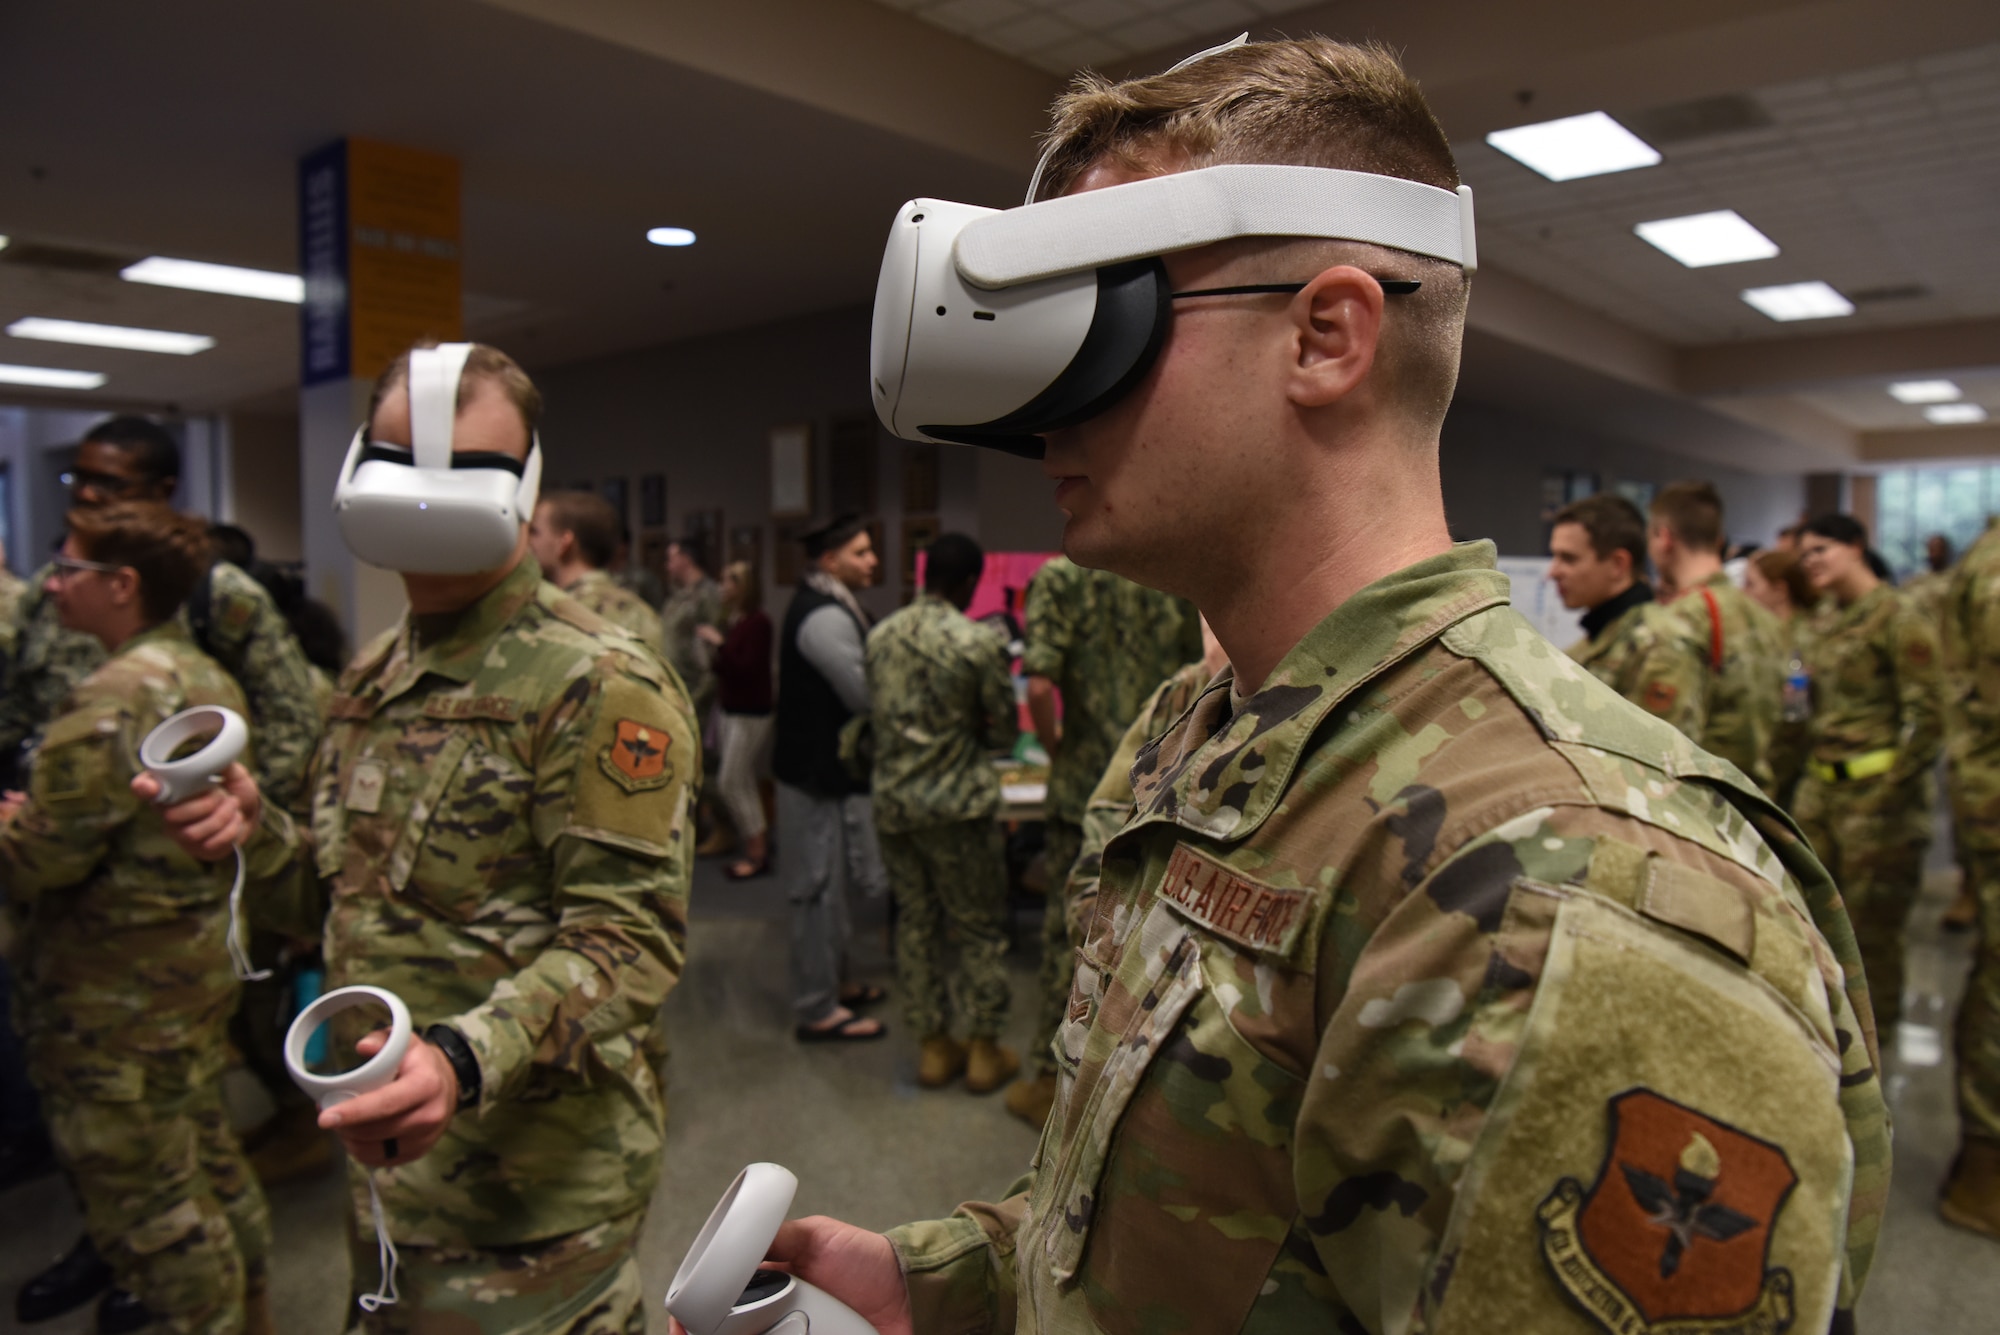 U.S. Air Force Airman 1st Class Byron Waldins, 316th Training Squadron student, tests a virtual reality experience during the Goodfellow AFB and Angelo State University Language and Culture Fair, April 26, 2022, San Angelo, Texas. The VR experience was developed by 517th Training Group members to provide innovative Department of Defense language training. (U.S. Air Force photo by Senior Airman Michael Bowman